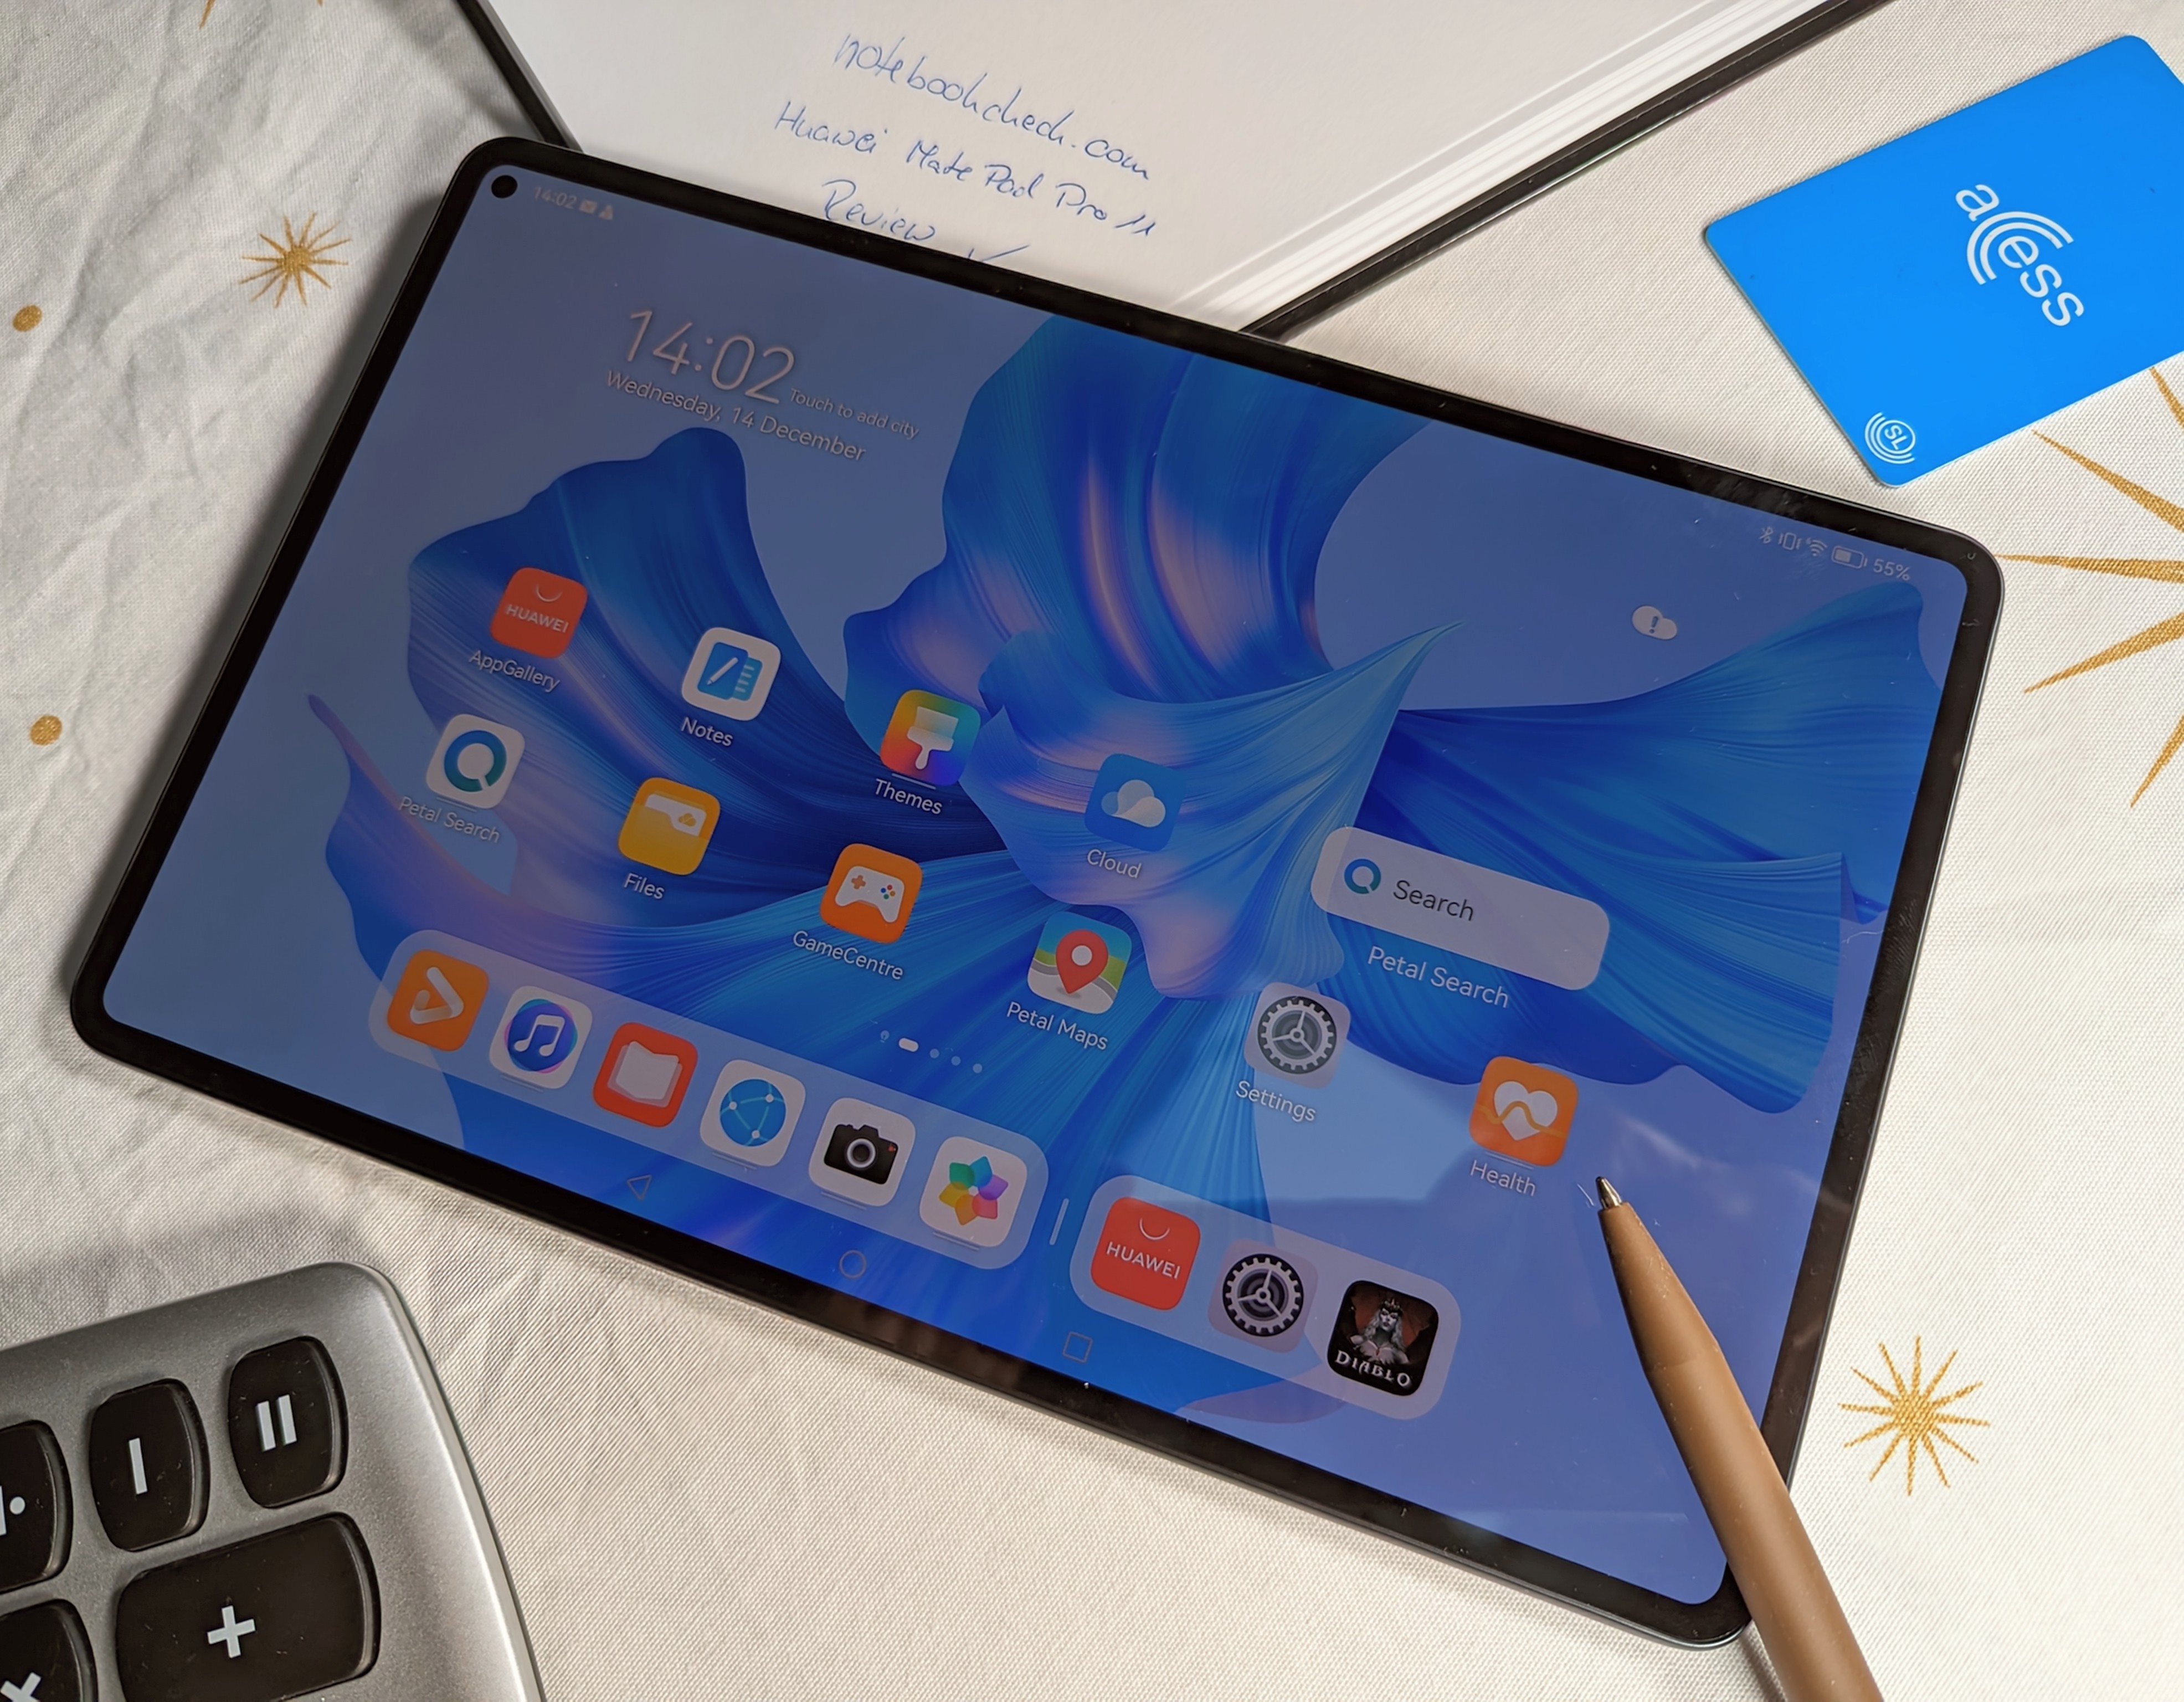 Huawei MatePad Pro 11 iPad – more tablet review Pro? A NotebookCheck.net affordable Reviews 2022 